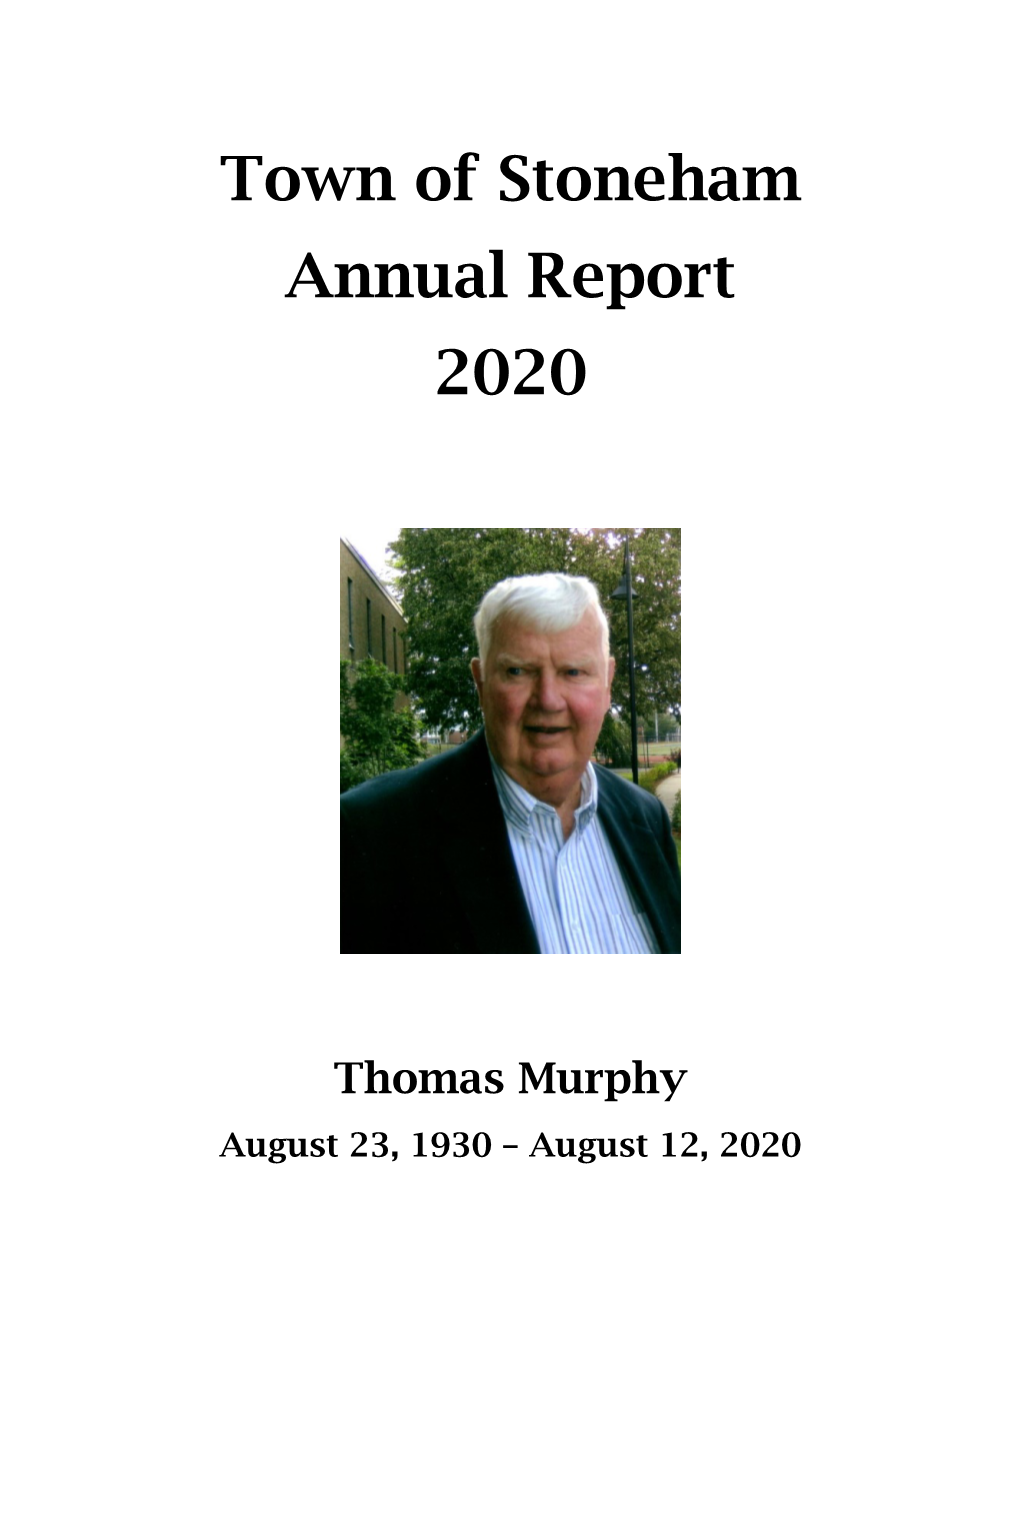 Town of Stoneham Annual Report 2020